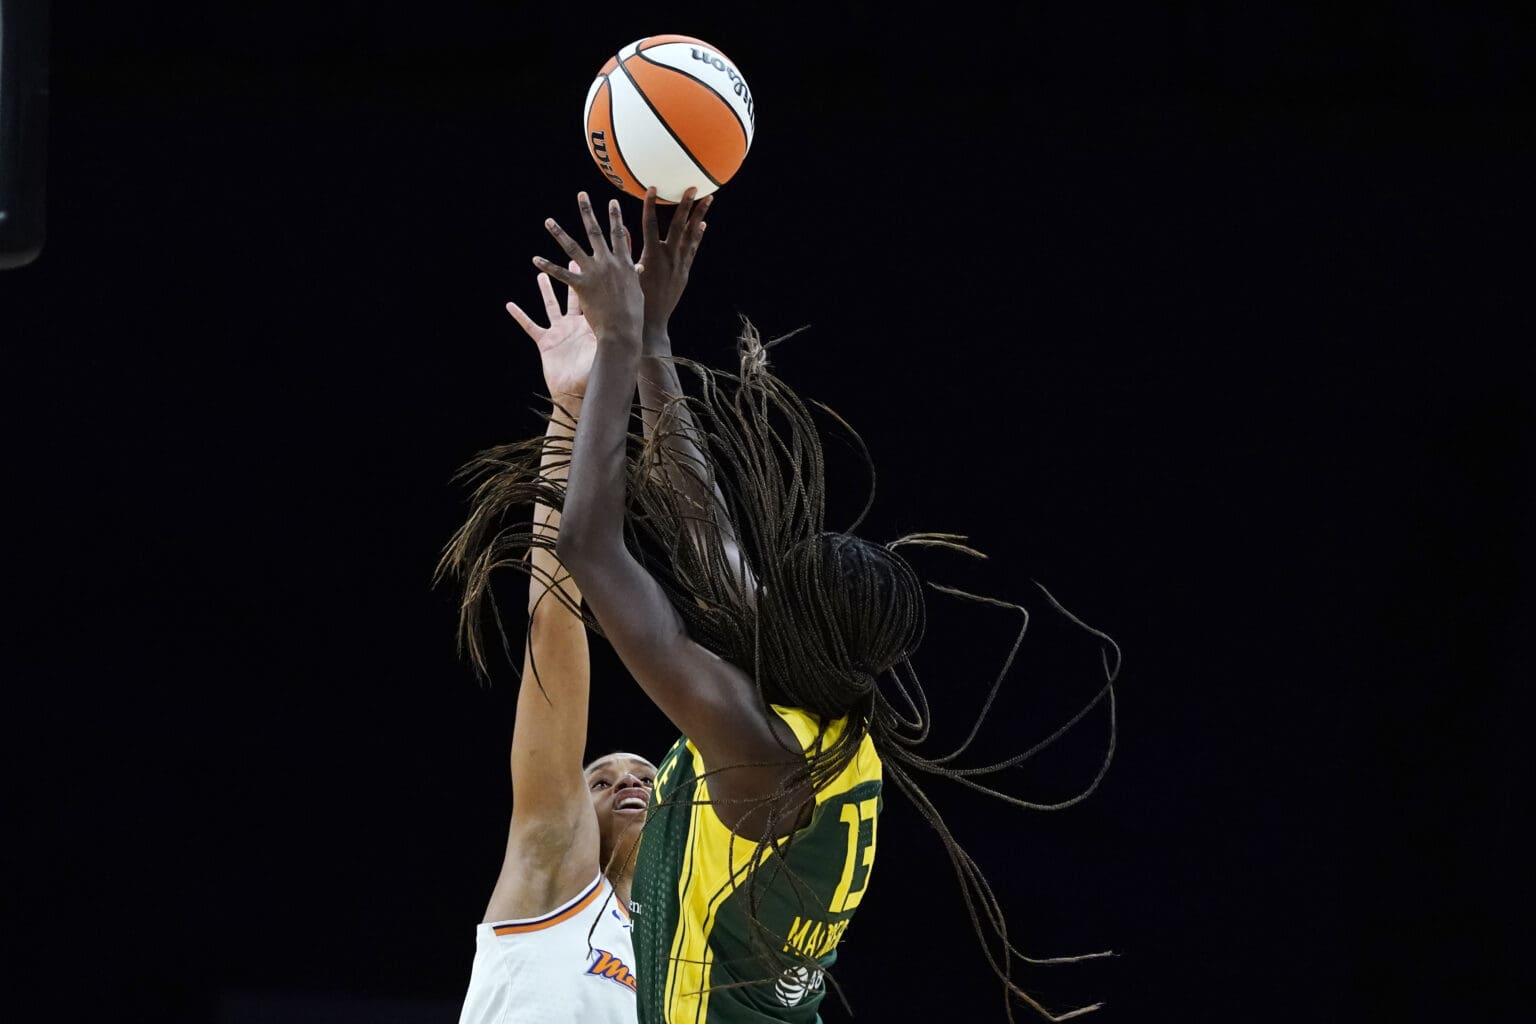 Seattle Storm center Ezi Magbegor shoots over Phoenix Mercury forward Brianna Turner during the second half of a WNBA basketball game Saturday